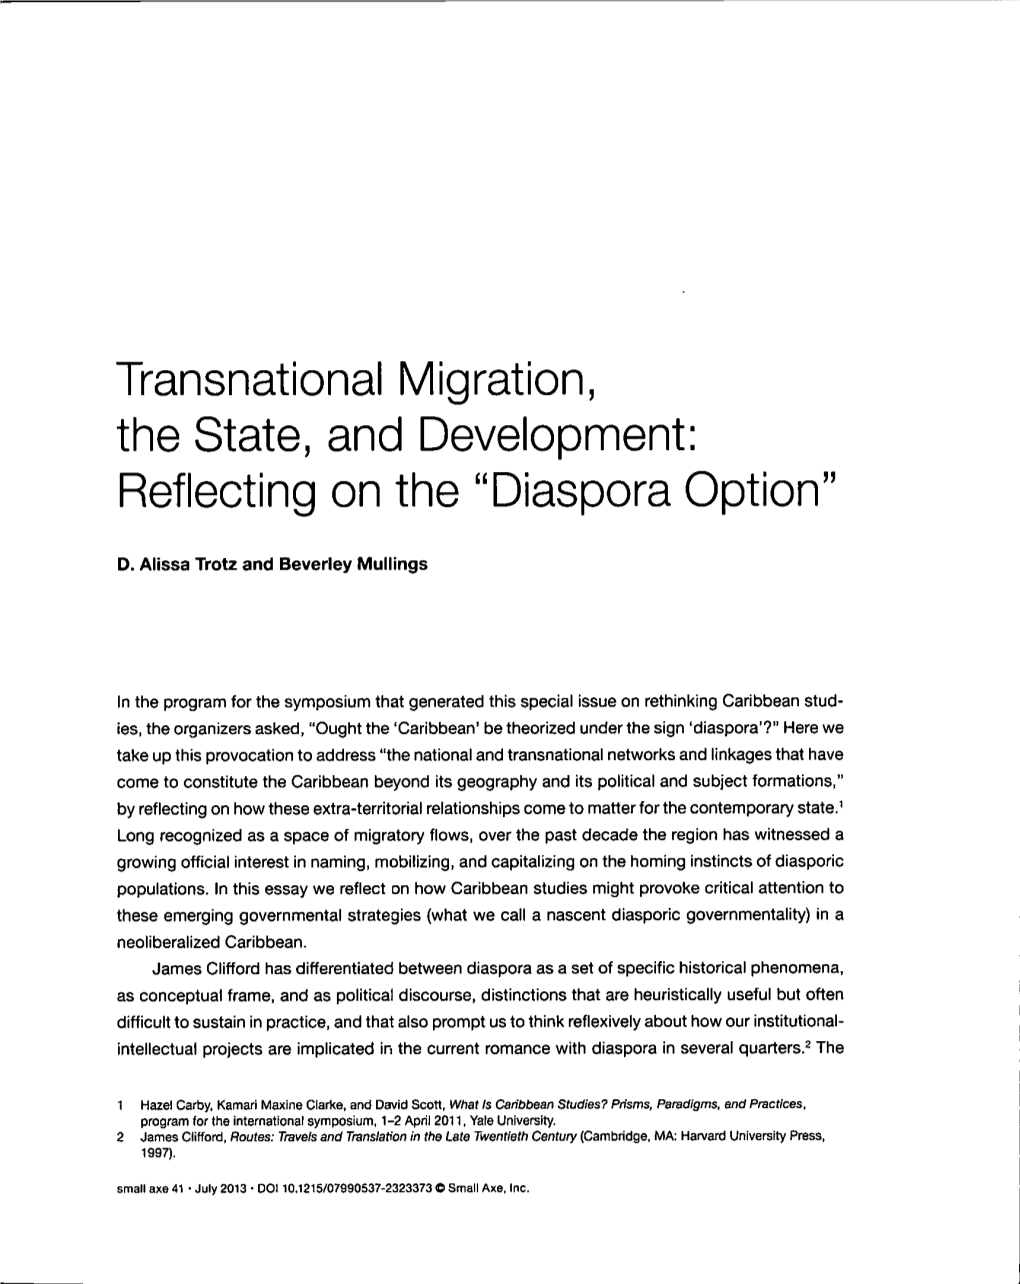 Transnational Migration, the State, and Development: Refleoting on the "Diaspora Option"